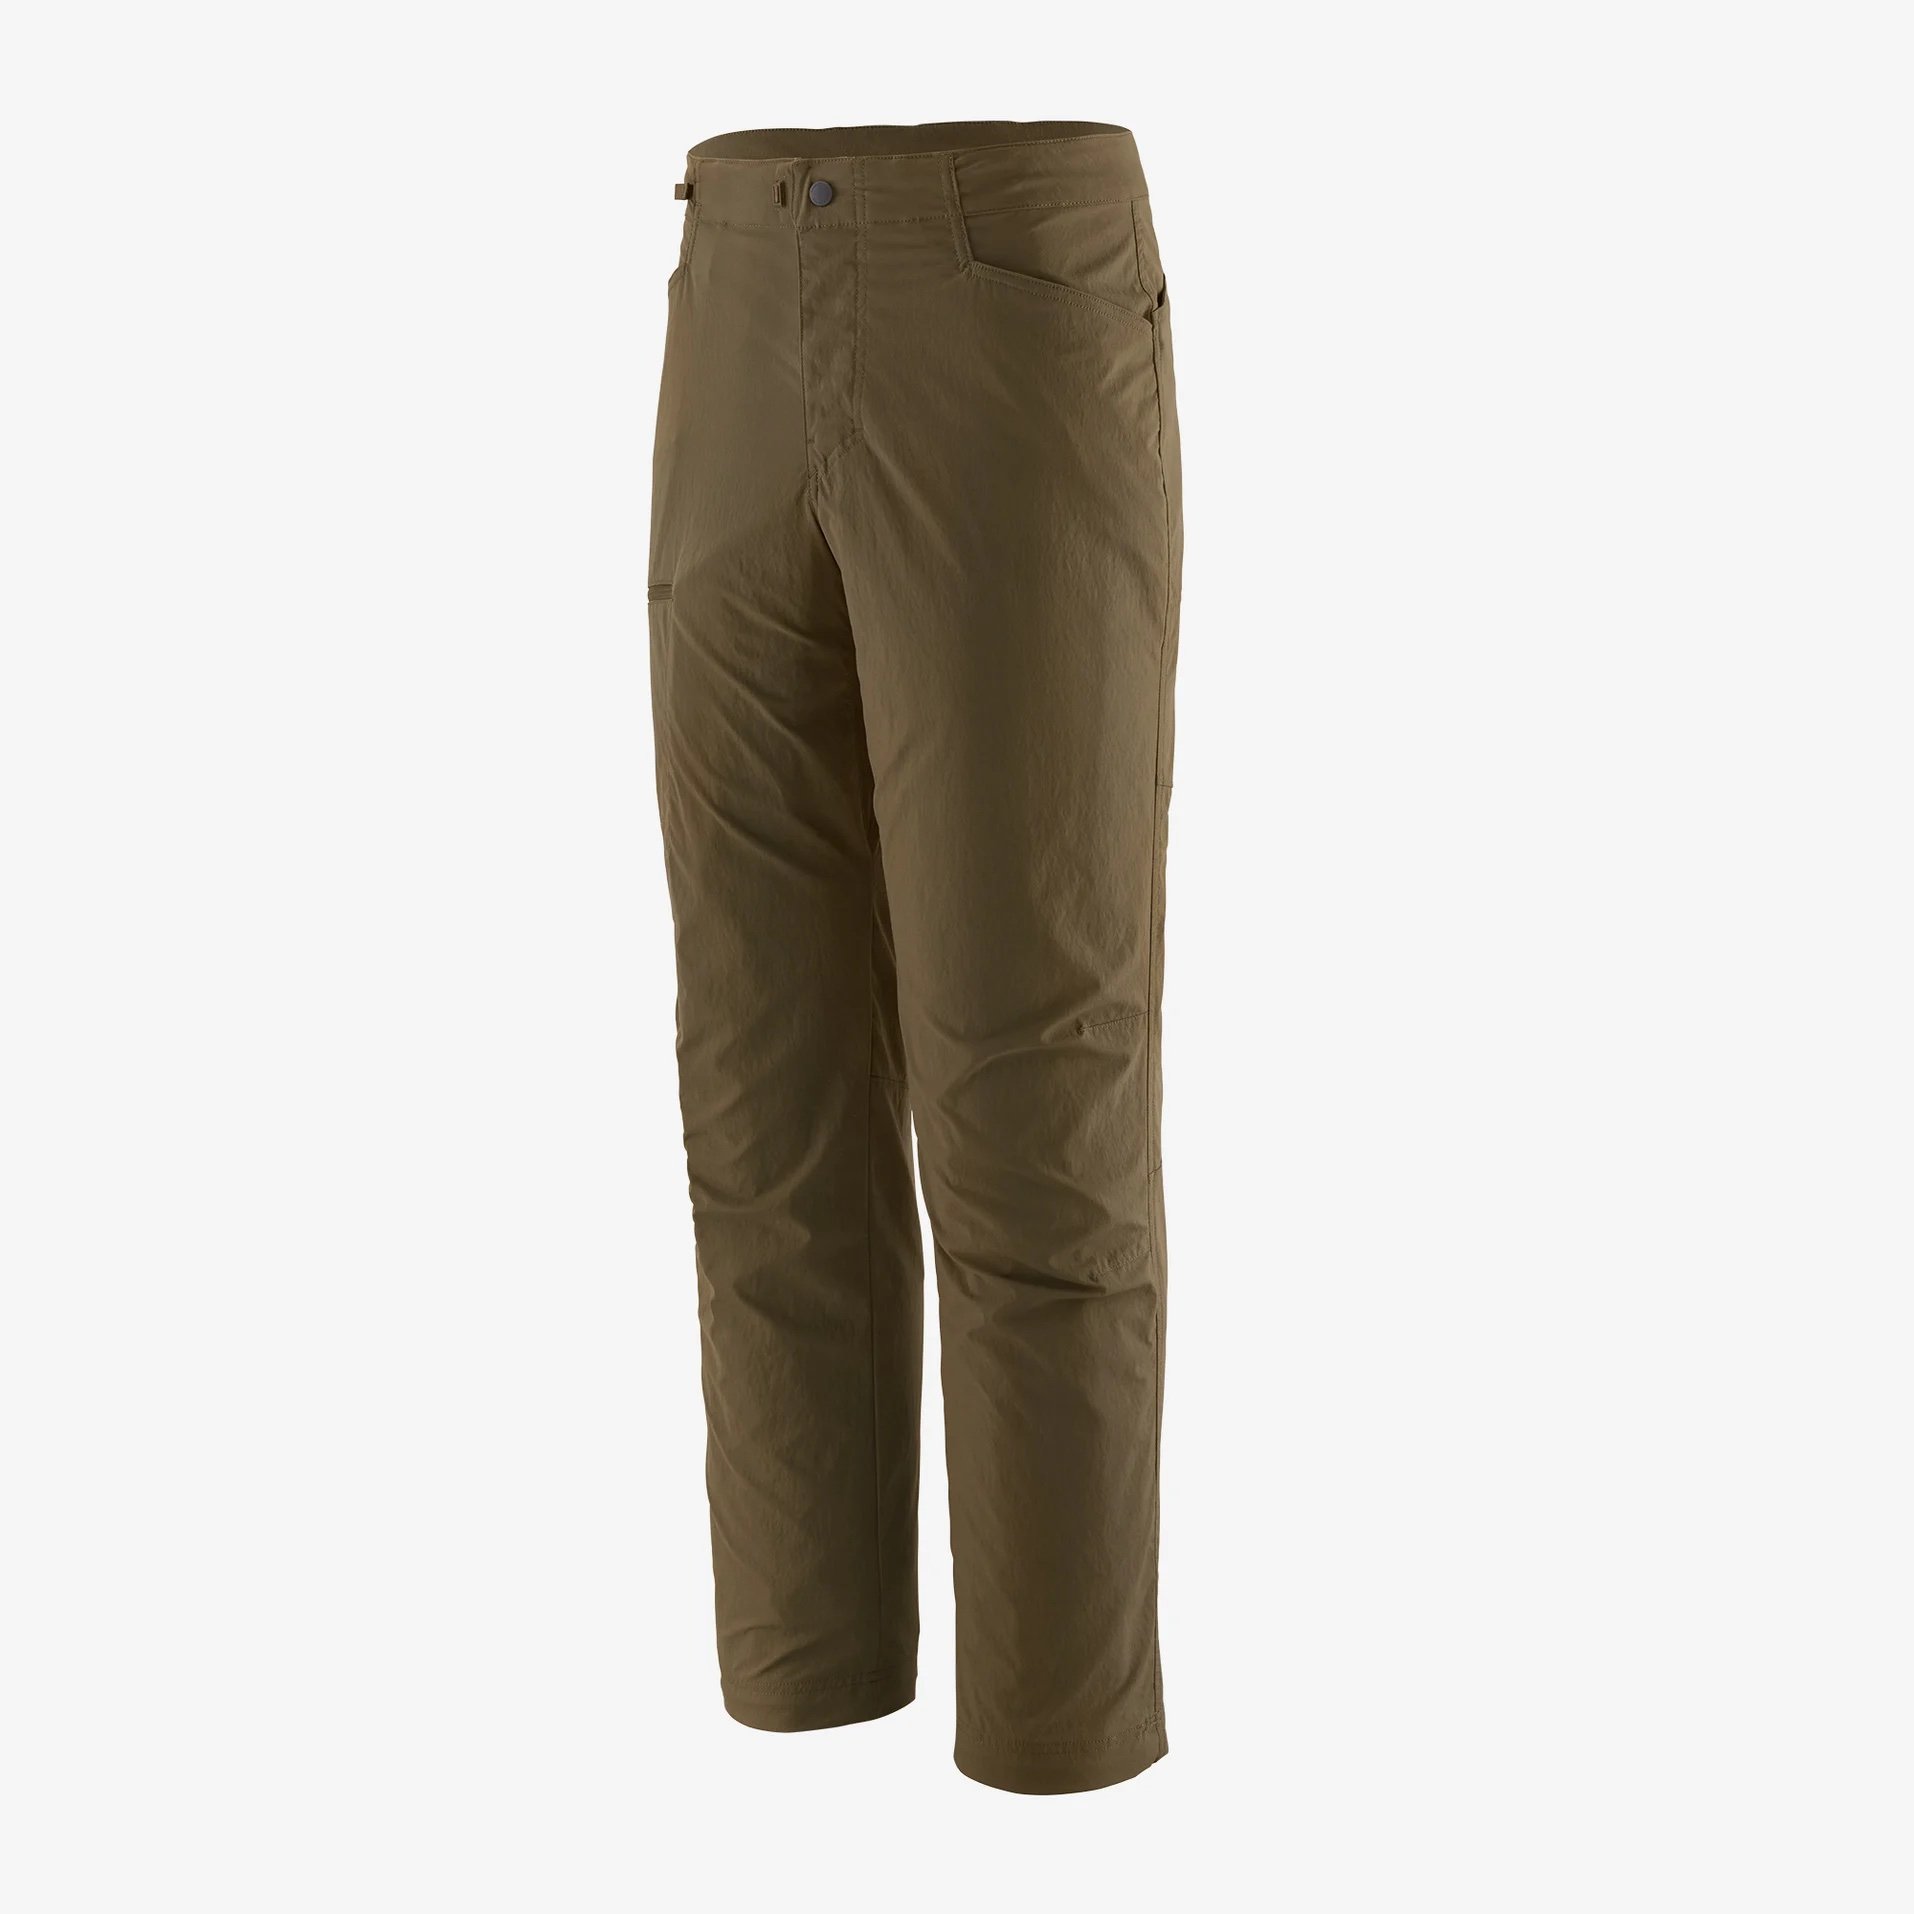 The Patagonia RPS Rock pants in dark olive green color